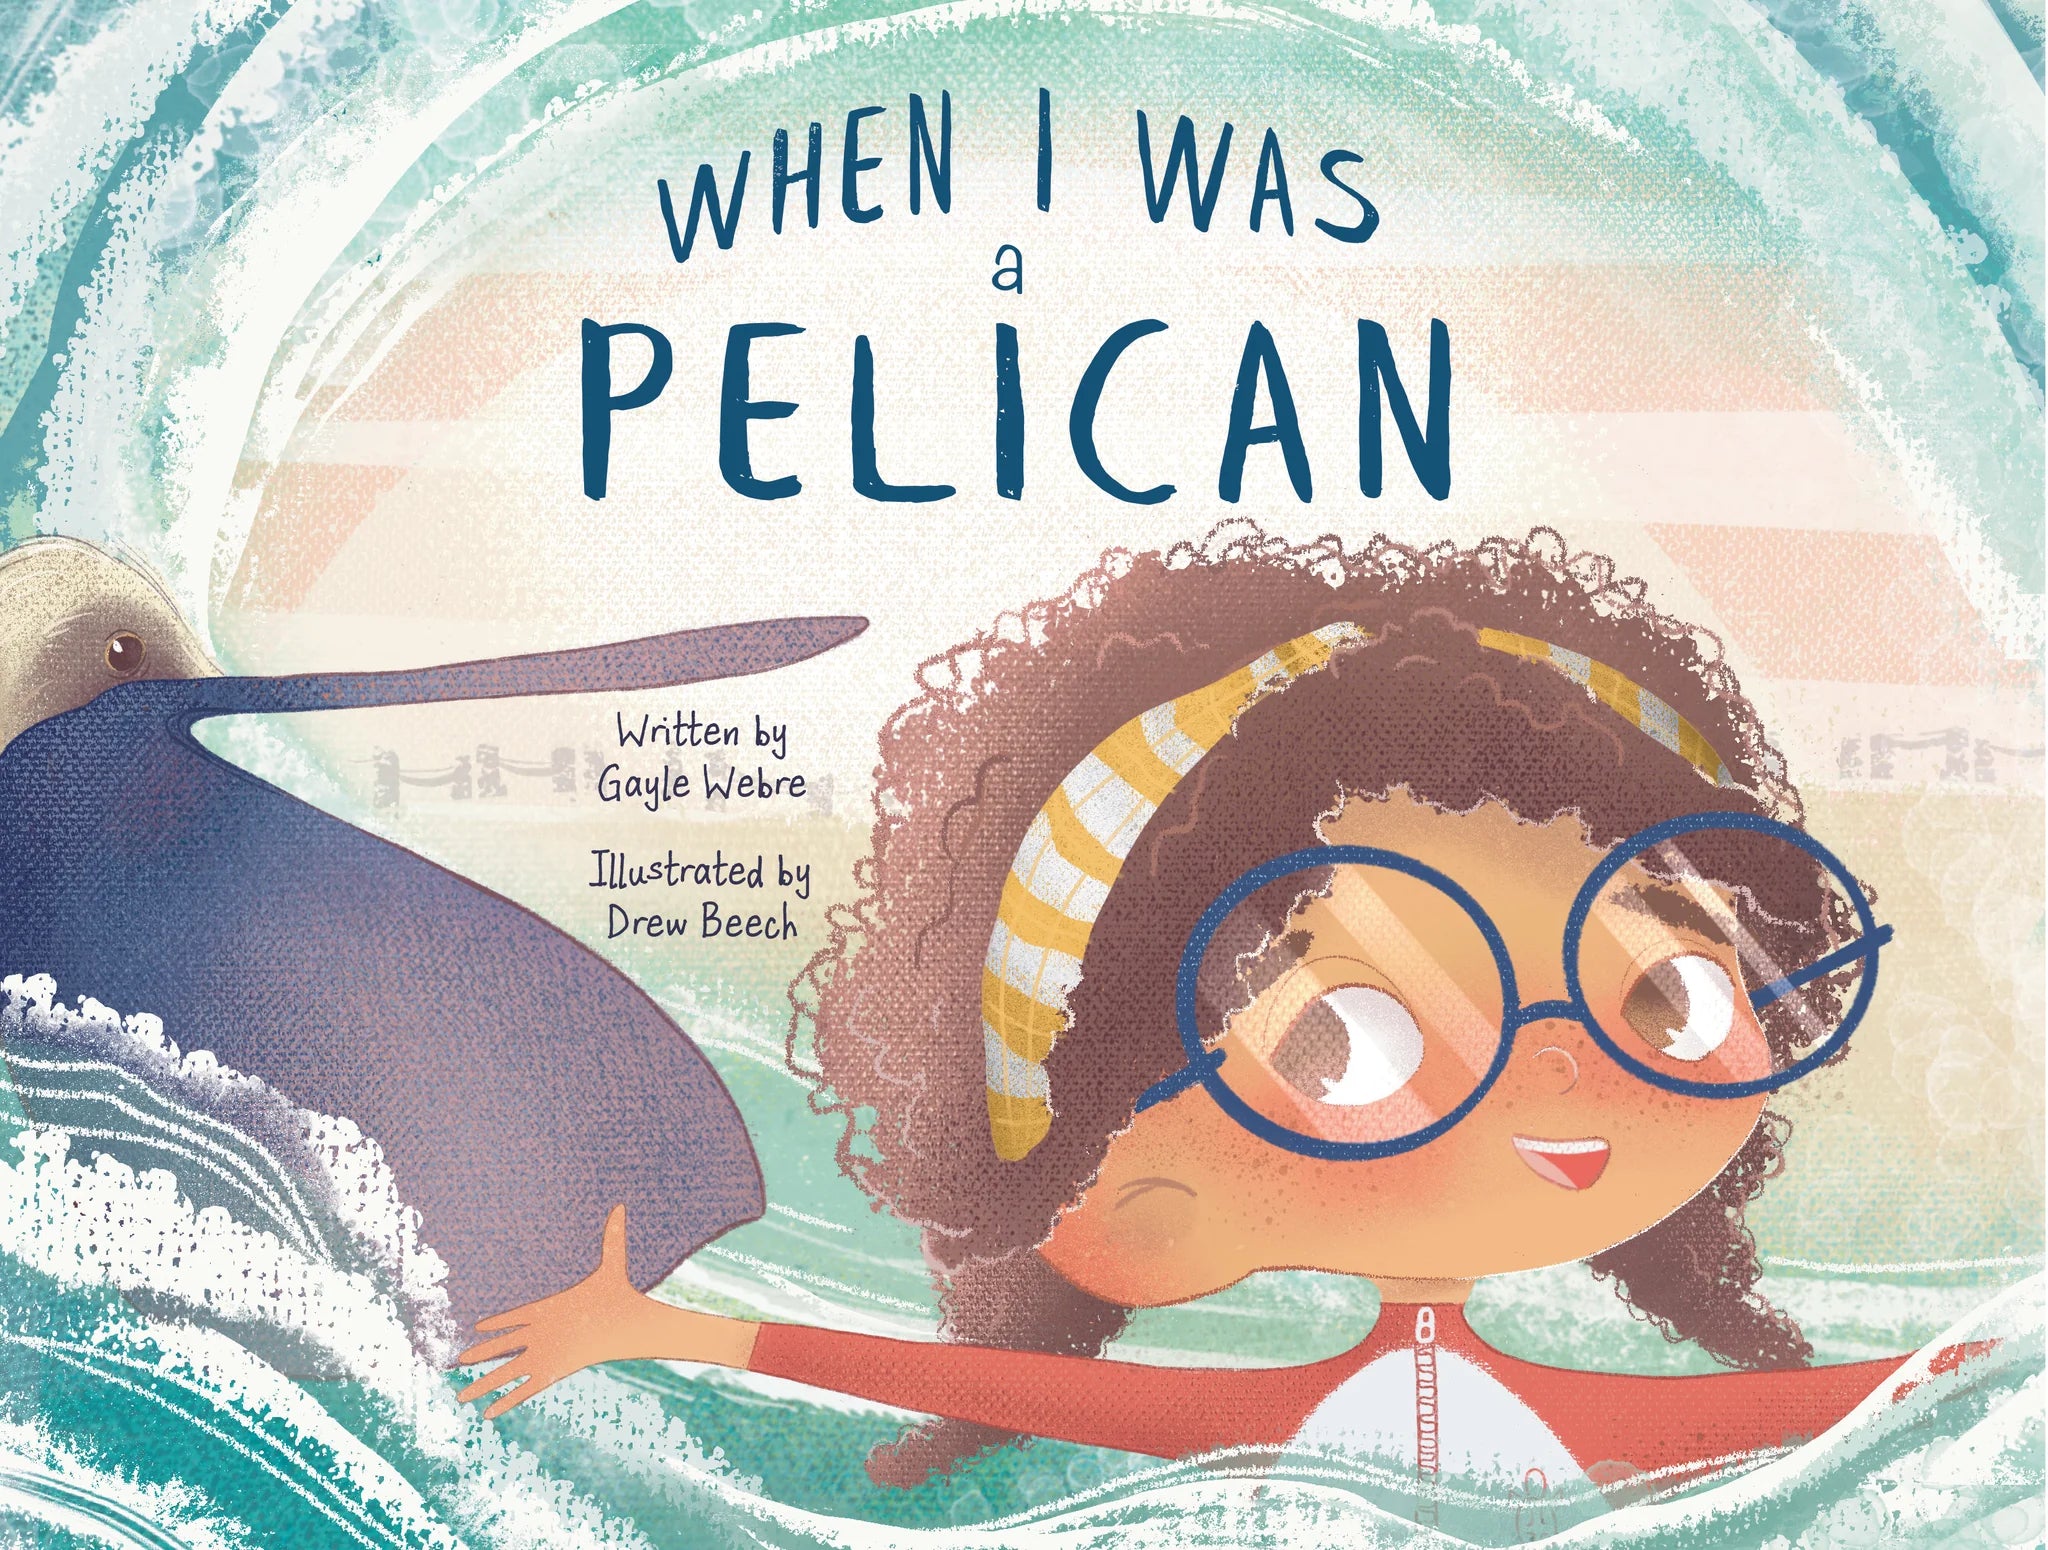 When I was a Pelican Book written by Gayle Webre, Illustrated by Drew Beech